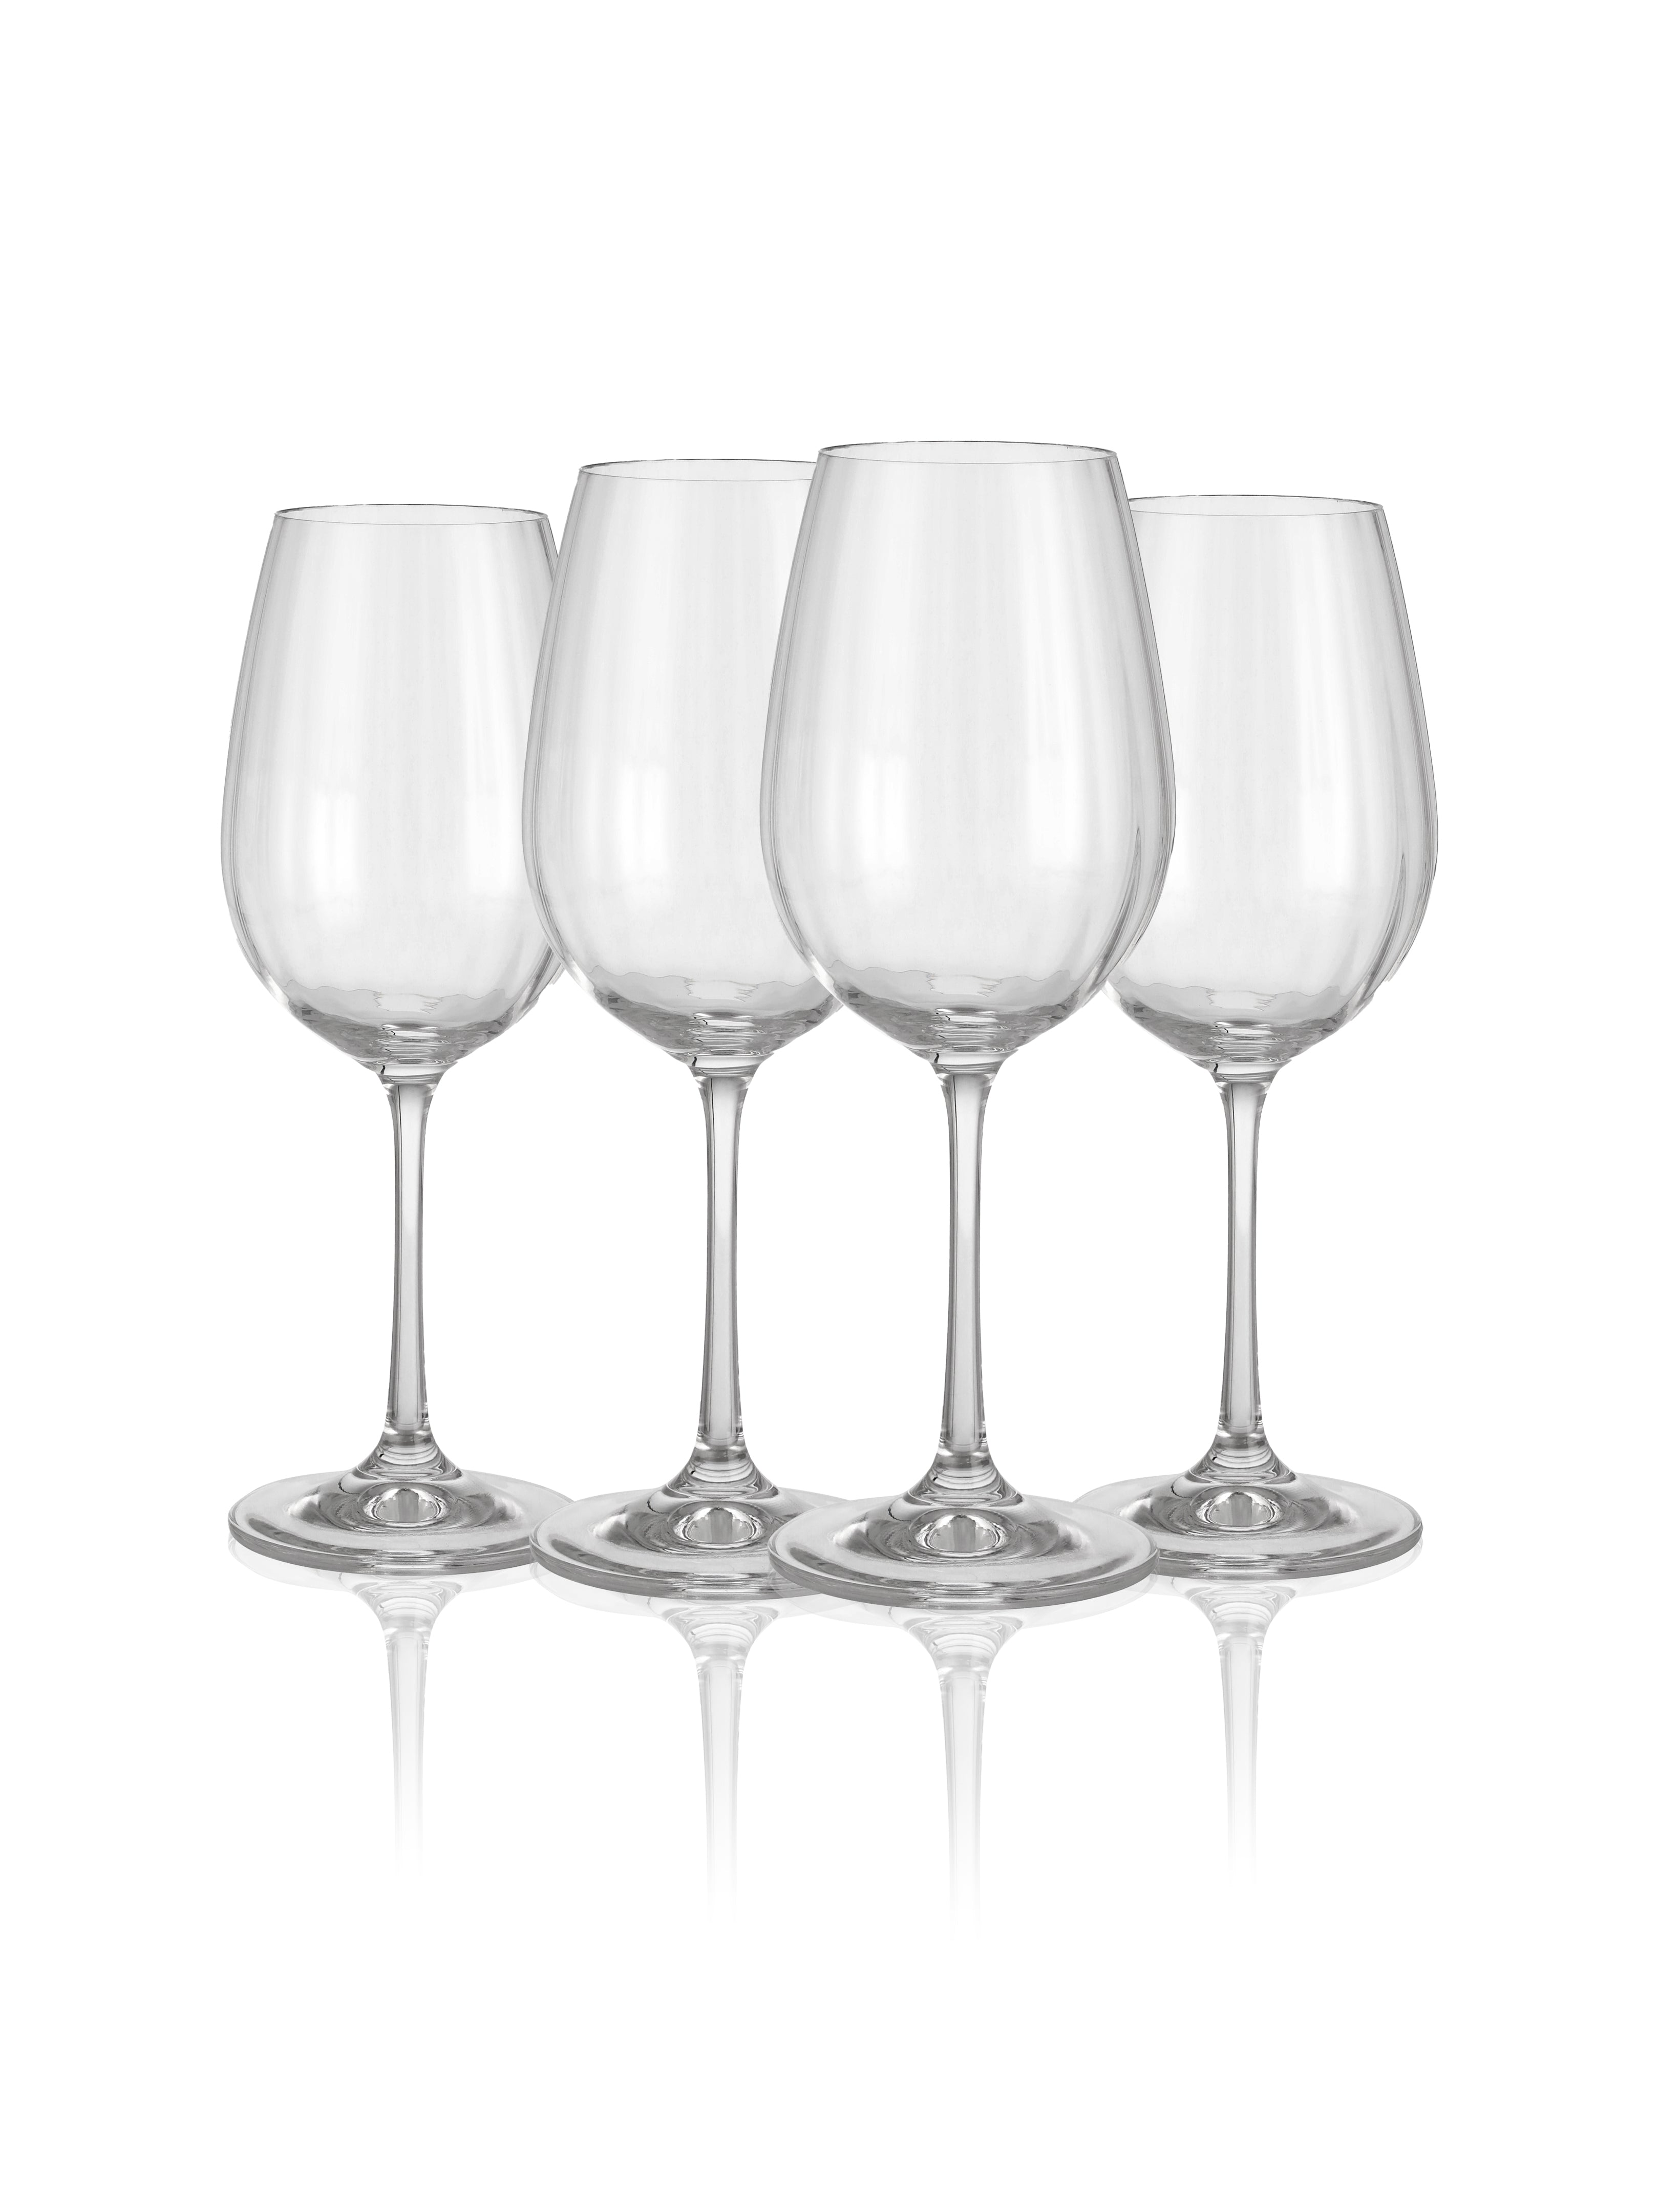 Sparkle and Sip: Premium Crystal Wine Glass, Set of 4